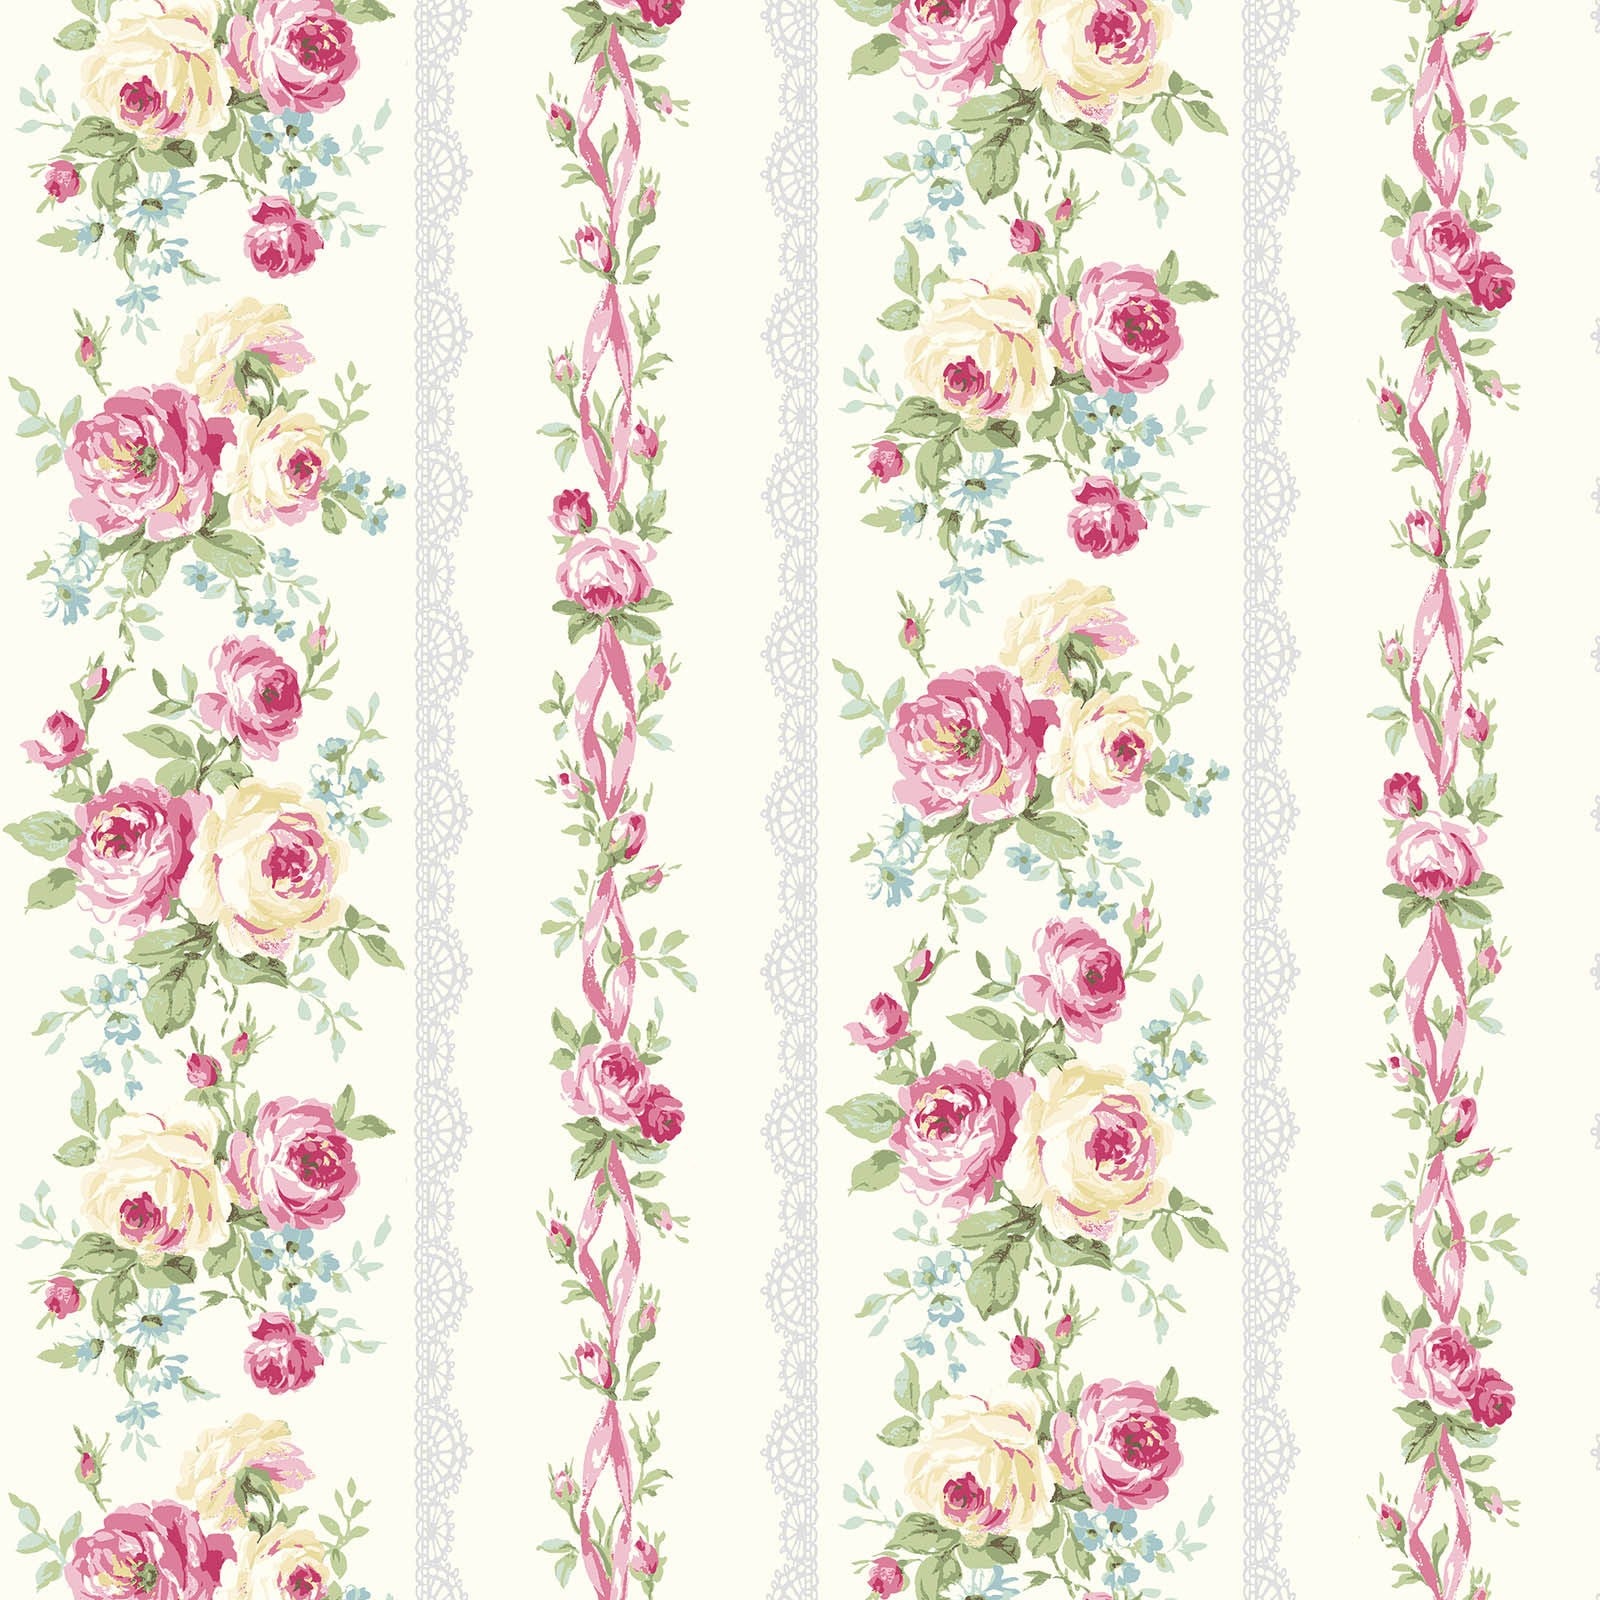 Rose Waltz RuRu Bouquet cotton fabric by Quilt Gate Ru2450-12A Roses and Ribbons on Cream